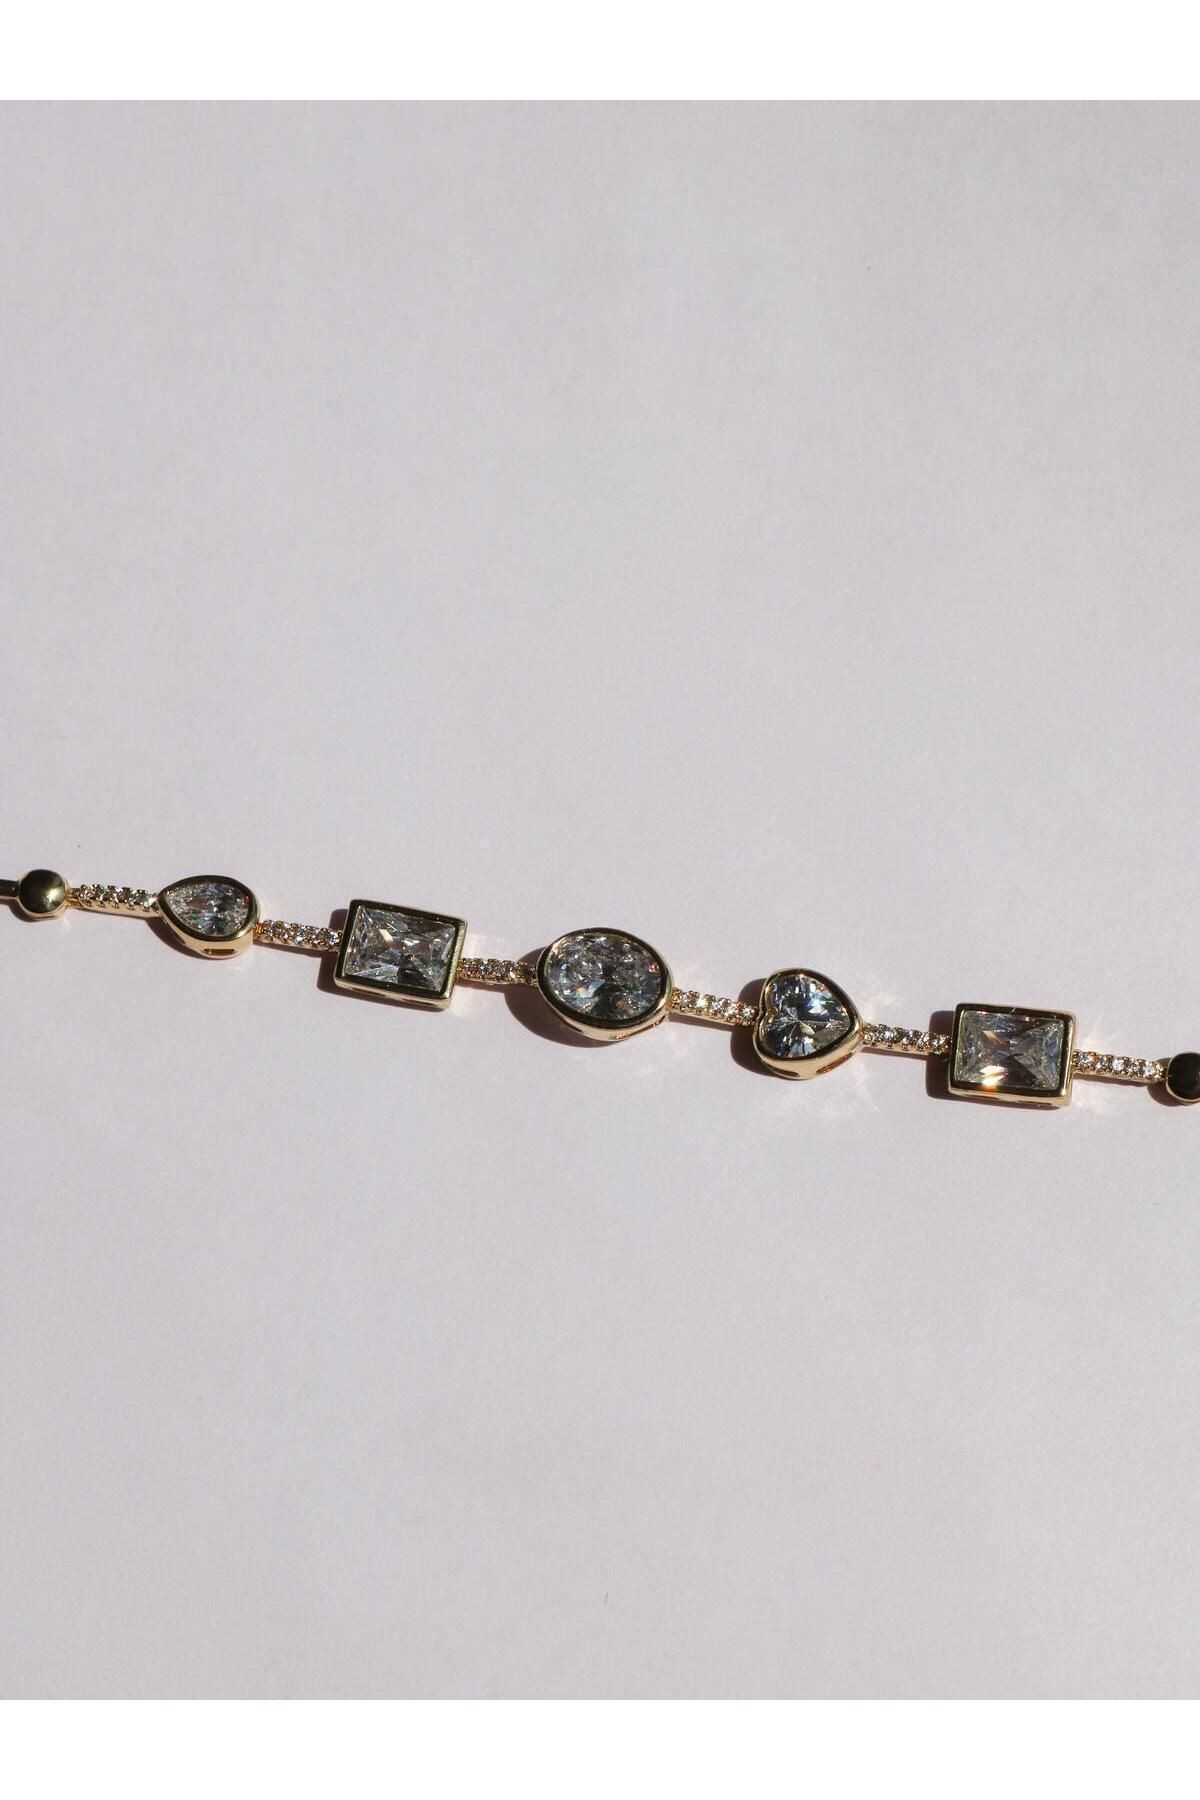 Steel Bracelet with Large Mixed Cut Stones